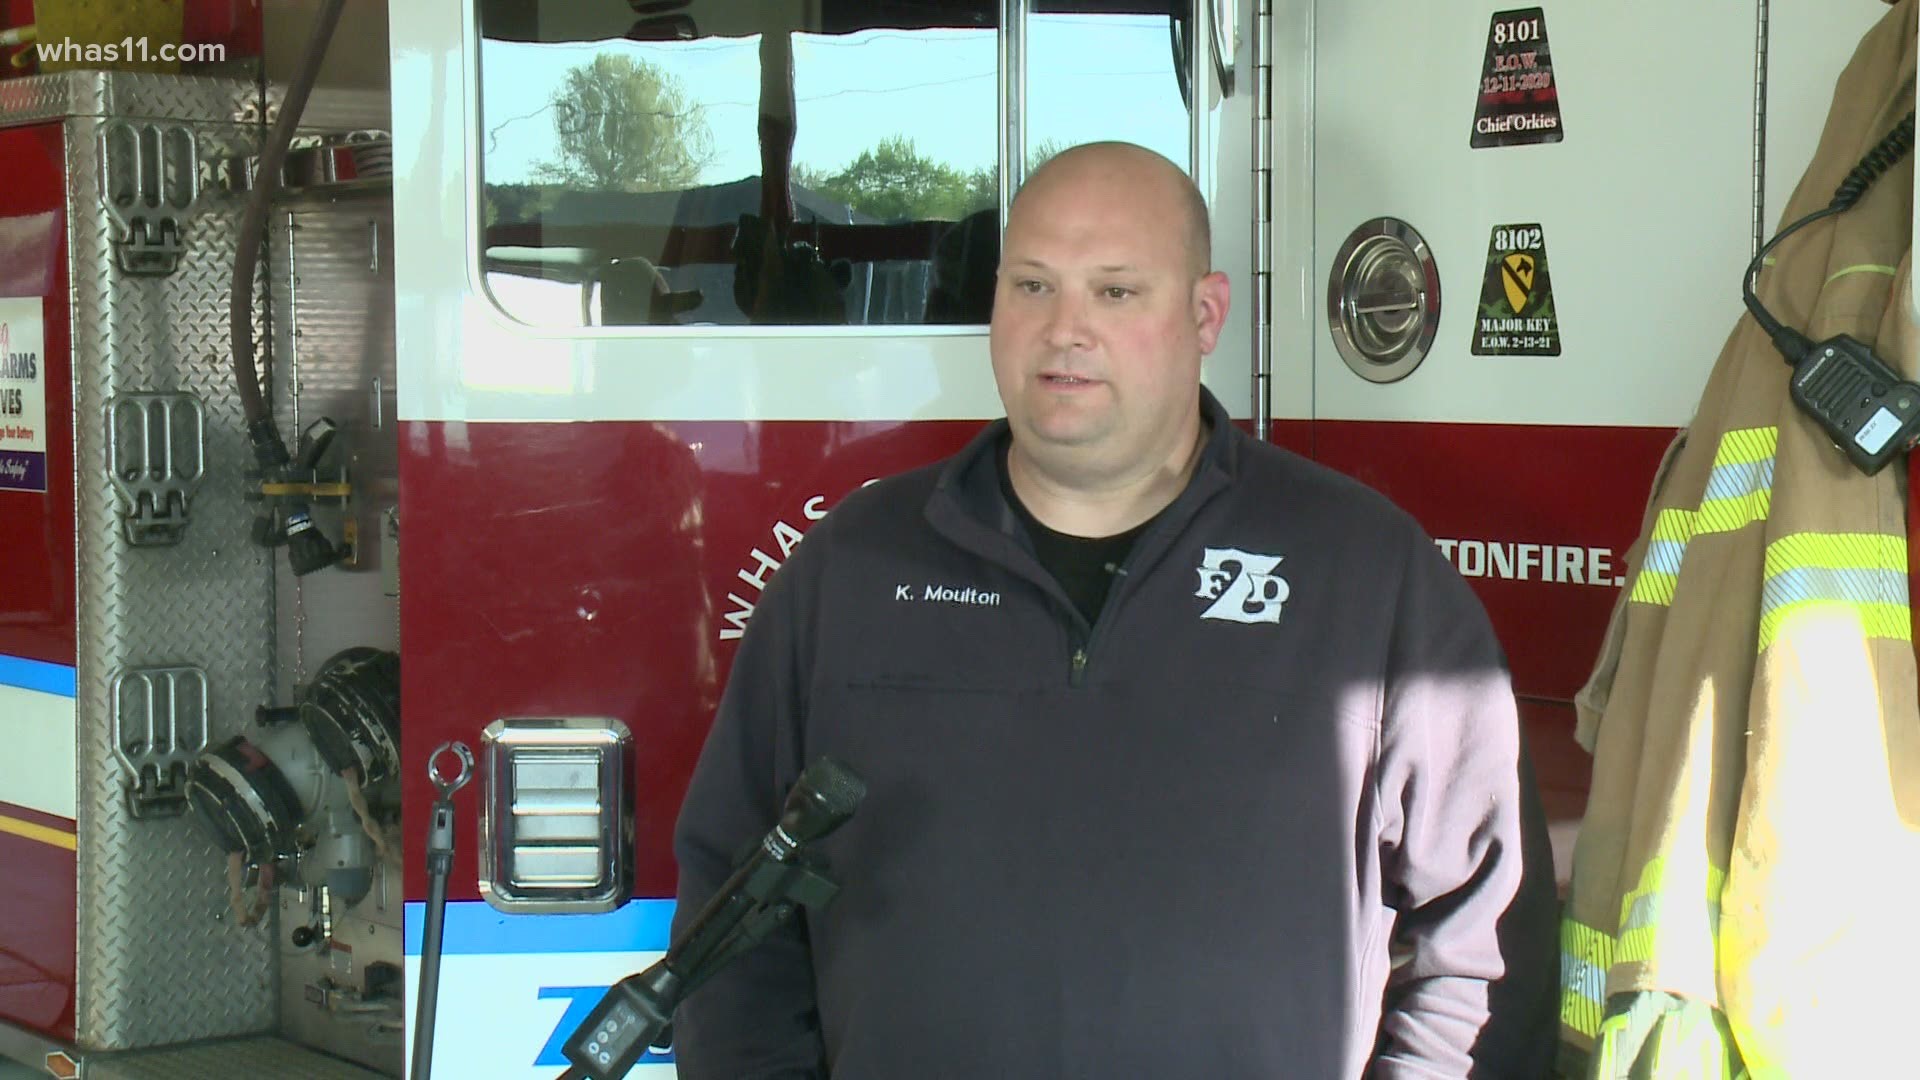 With the deaths of two leaders to COVID-19,  Zoneton Fire named a new fire chief. Kevin Moulton will take over.